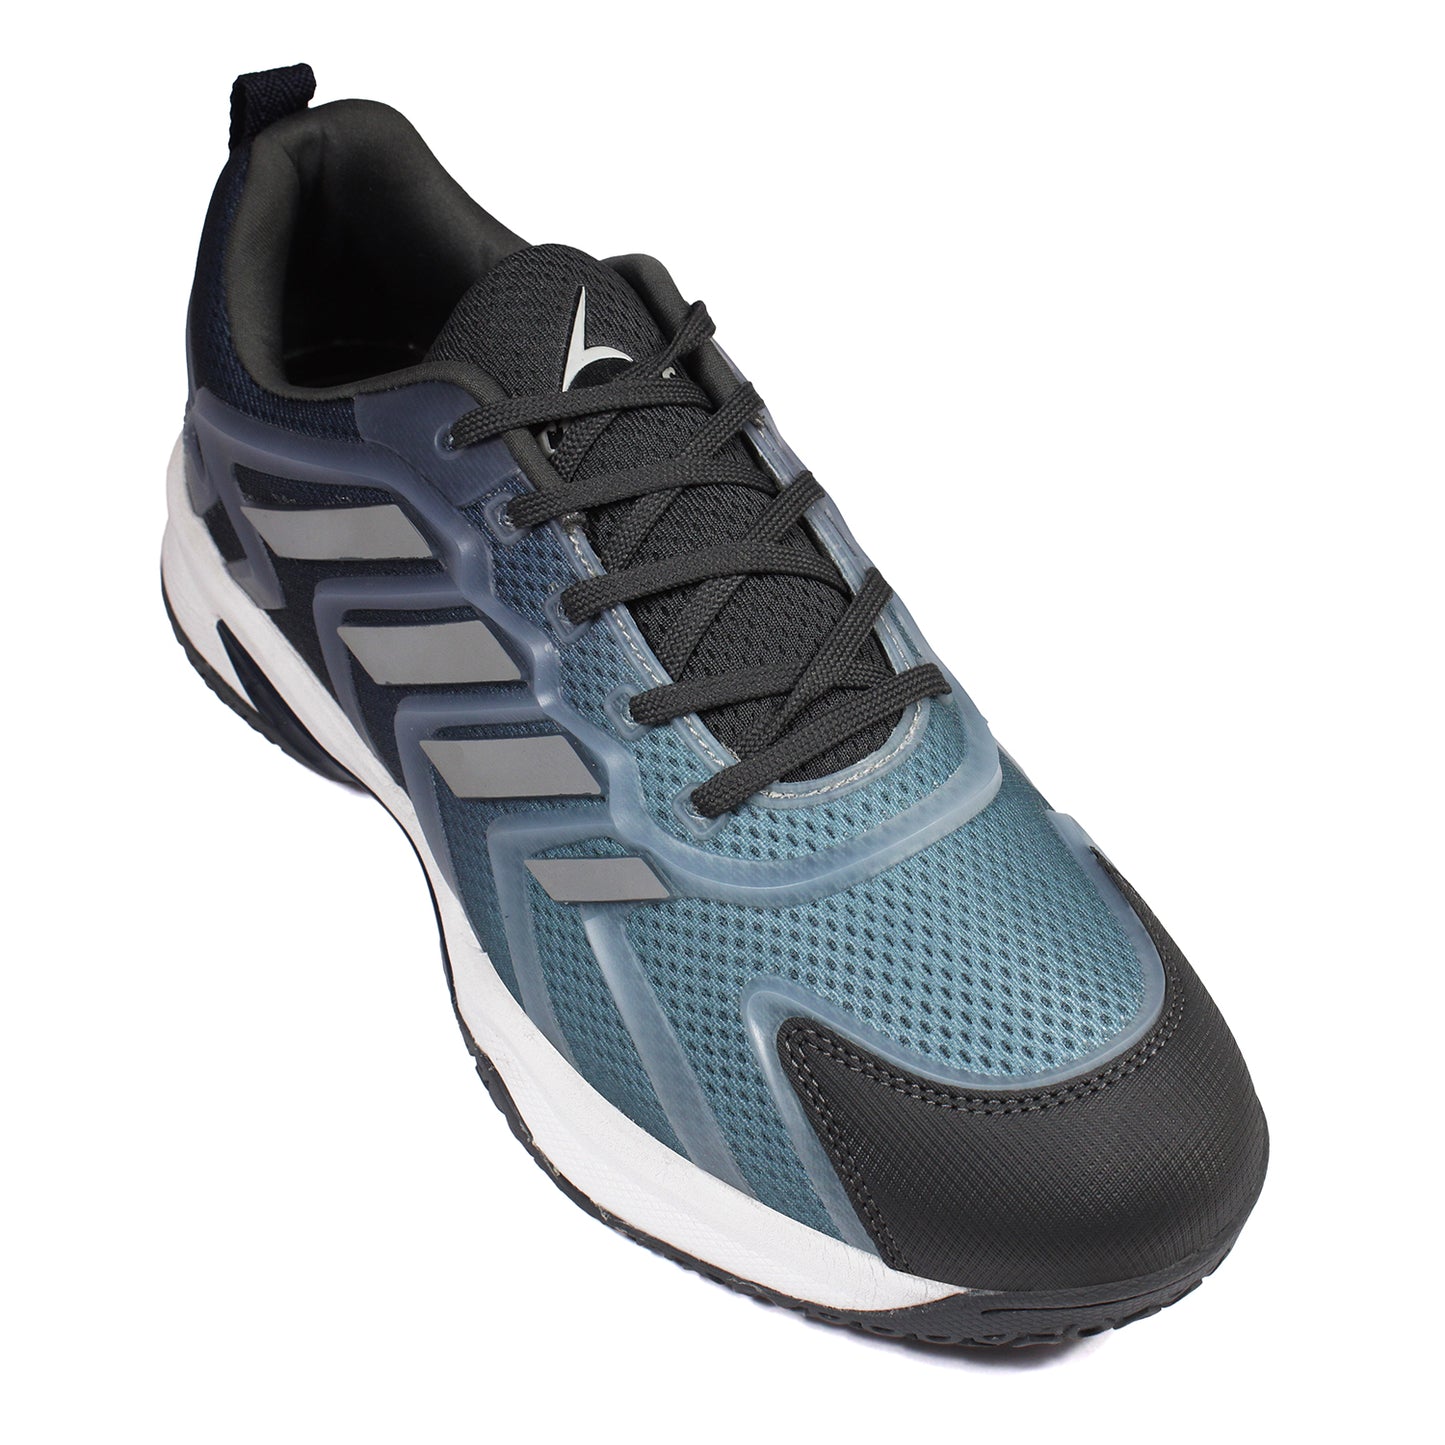 Men's Sport Shoe's Tracer India Sneaker's French Blue